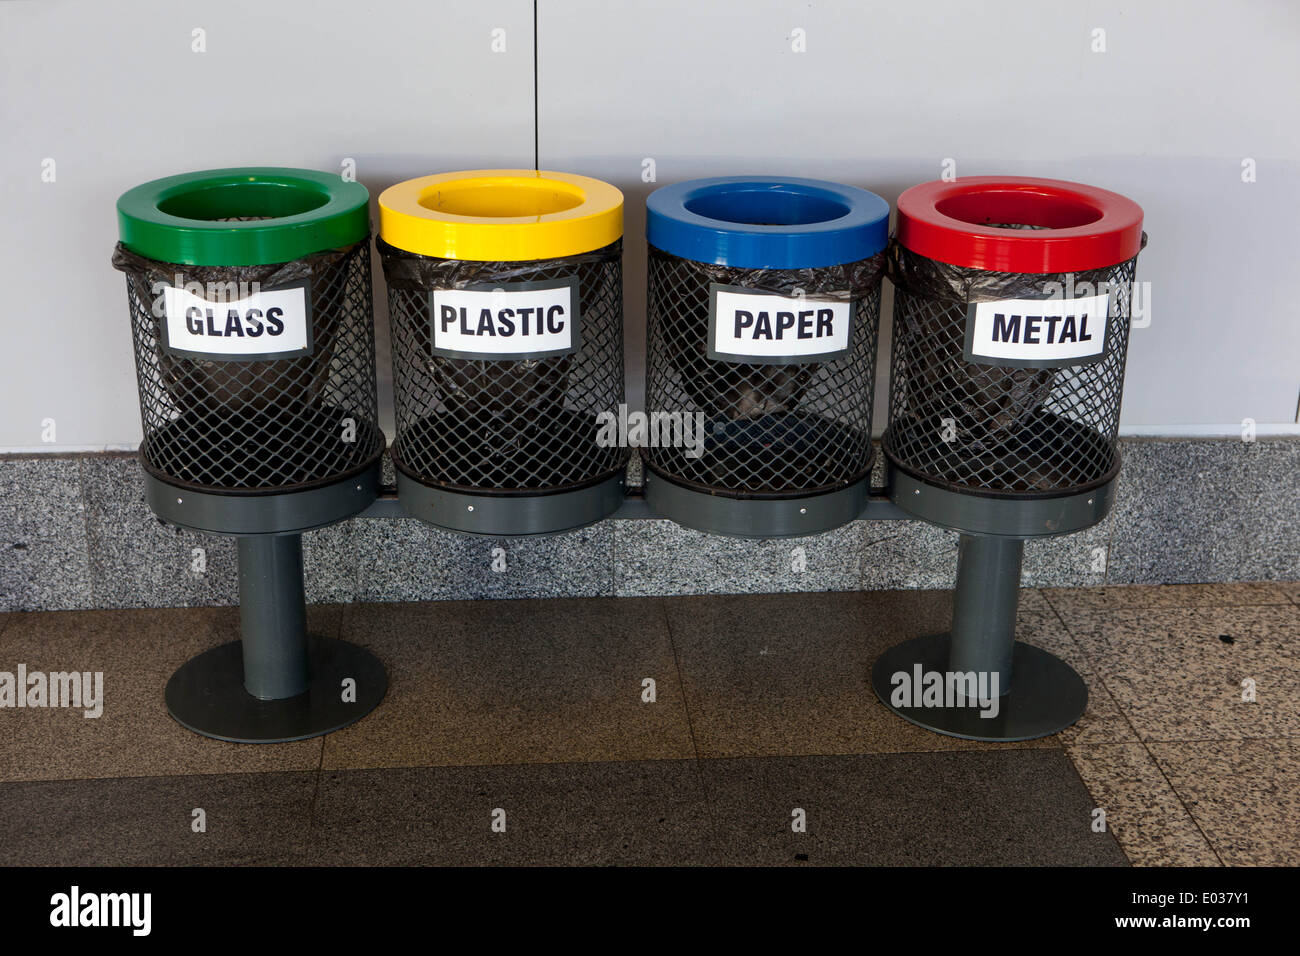 Waste recycling bin with multiple sections for different materials Stock Photo